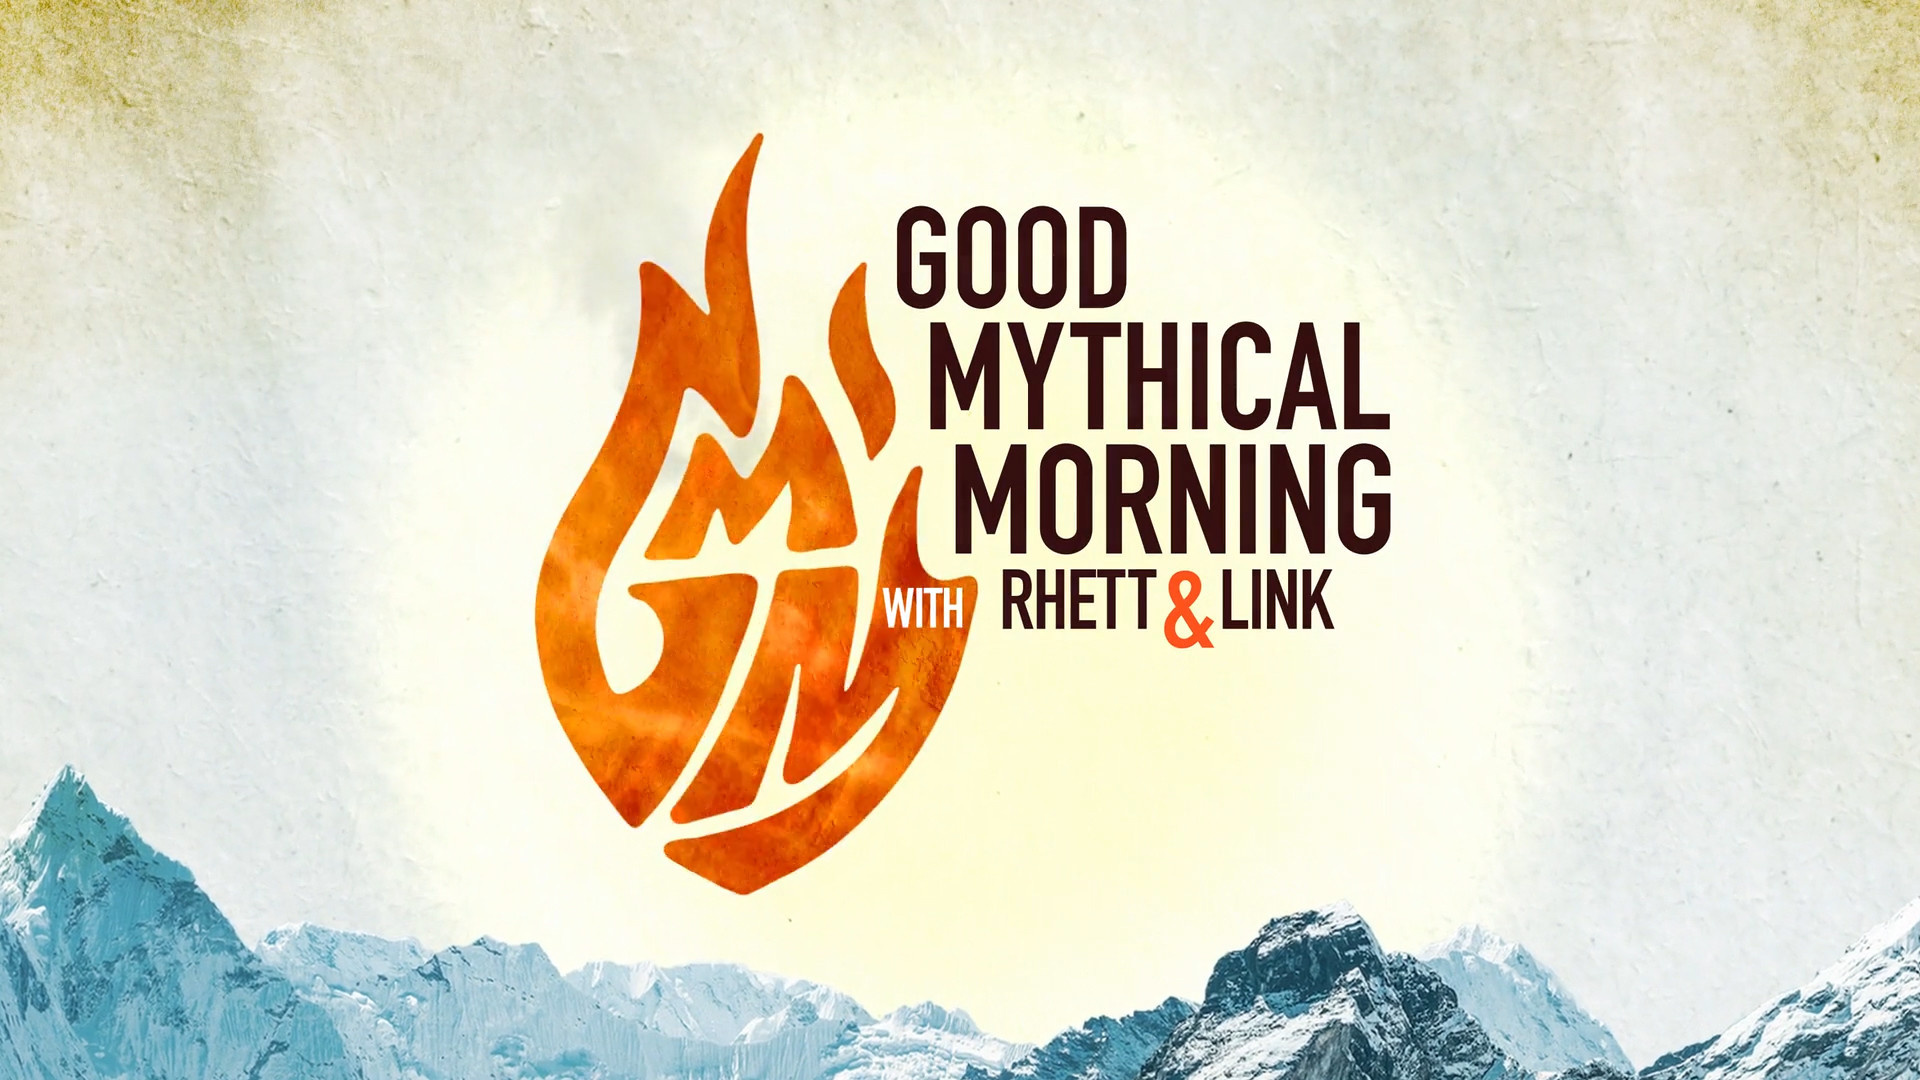 Good Mythical Morning: Rhett and Link show, Season 15-17 title card made by Dana Schechter, 2019-2020. 1920x1080 Full HD Background.